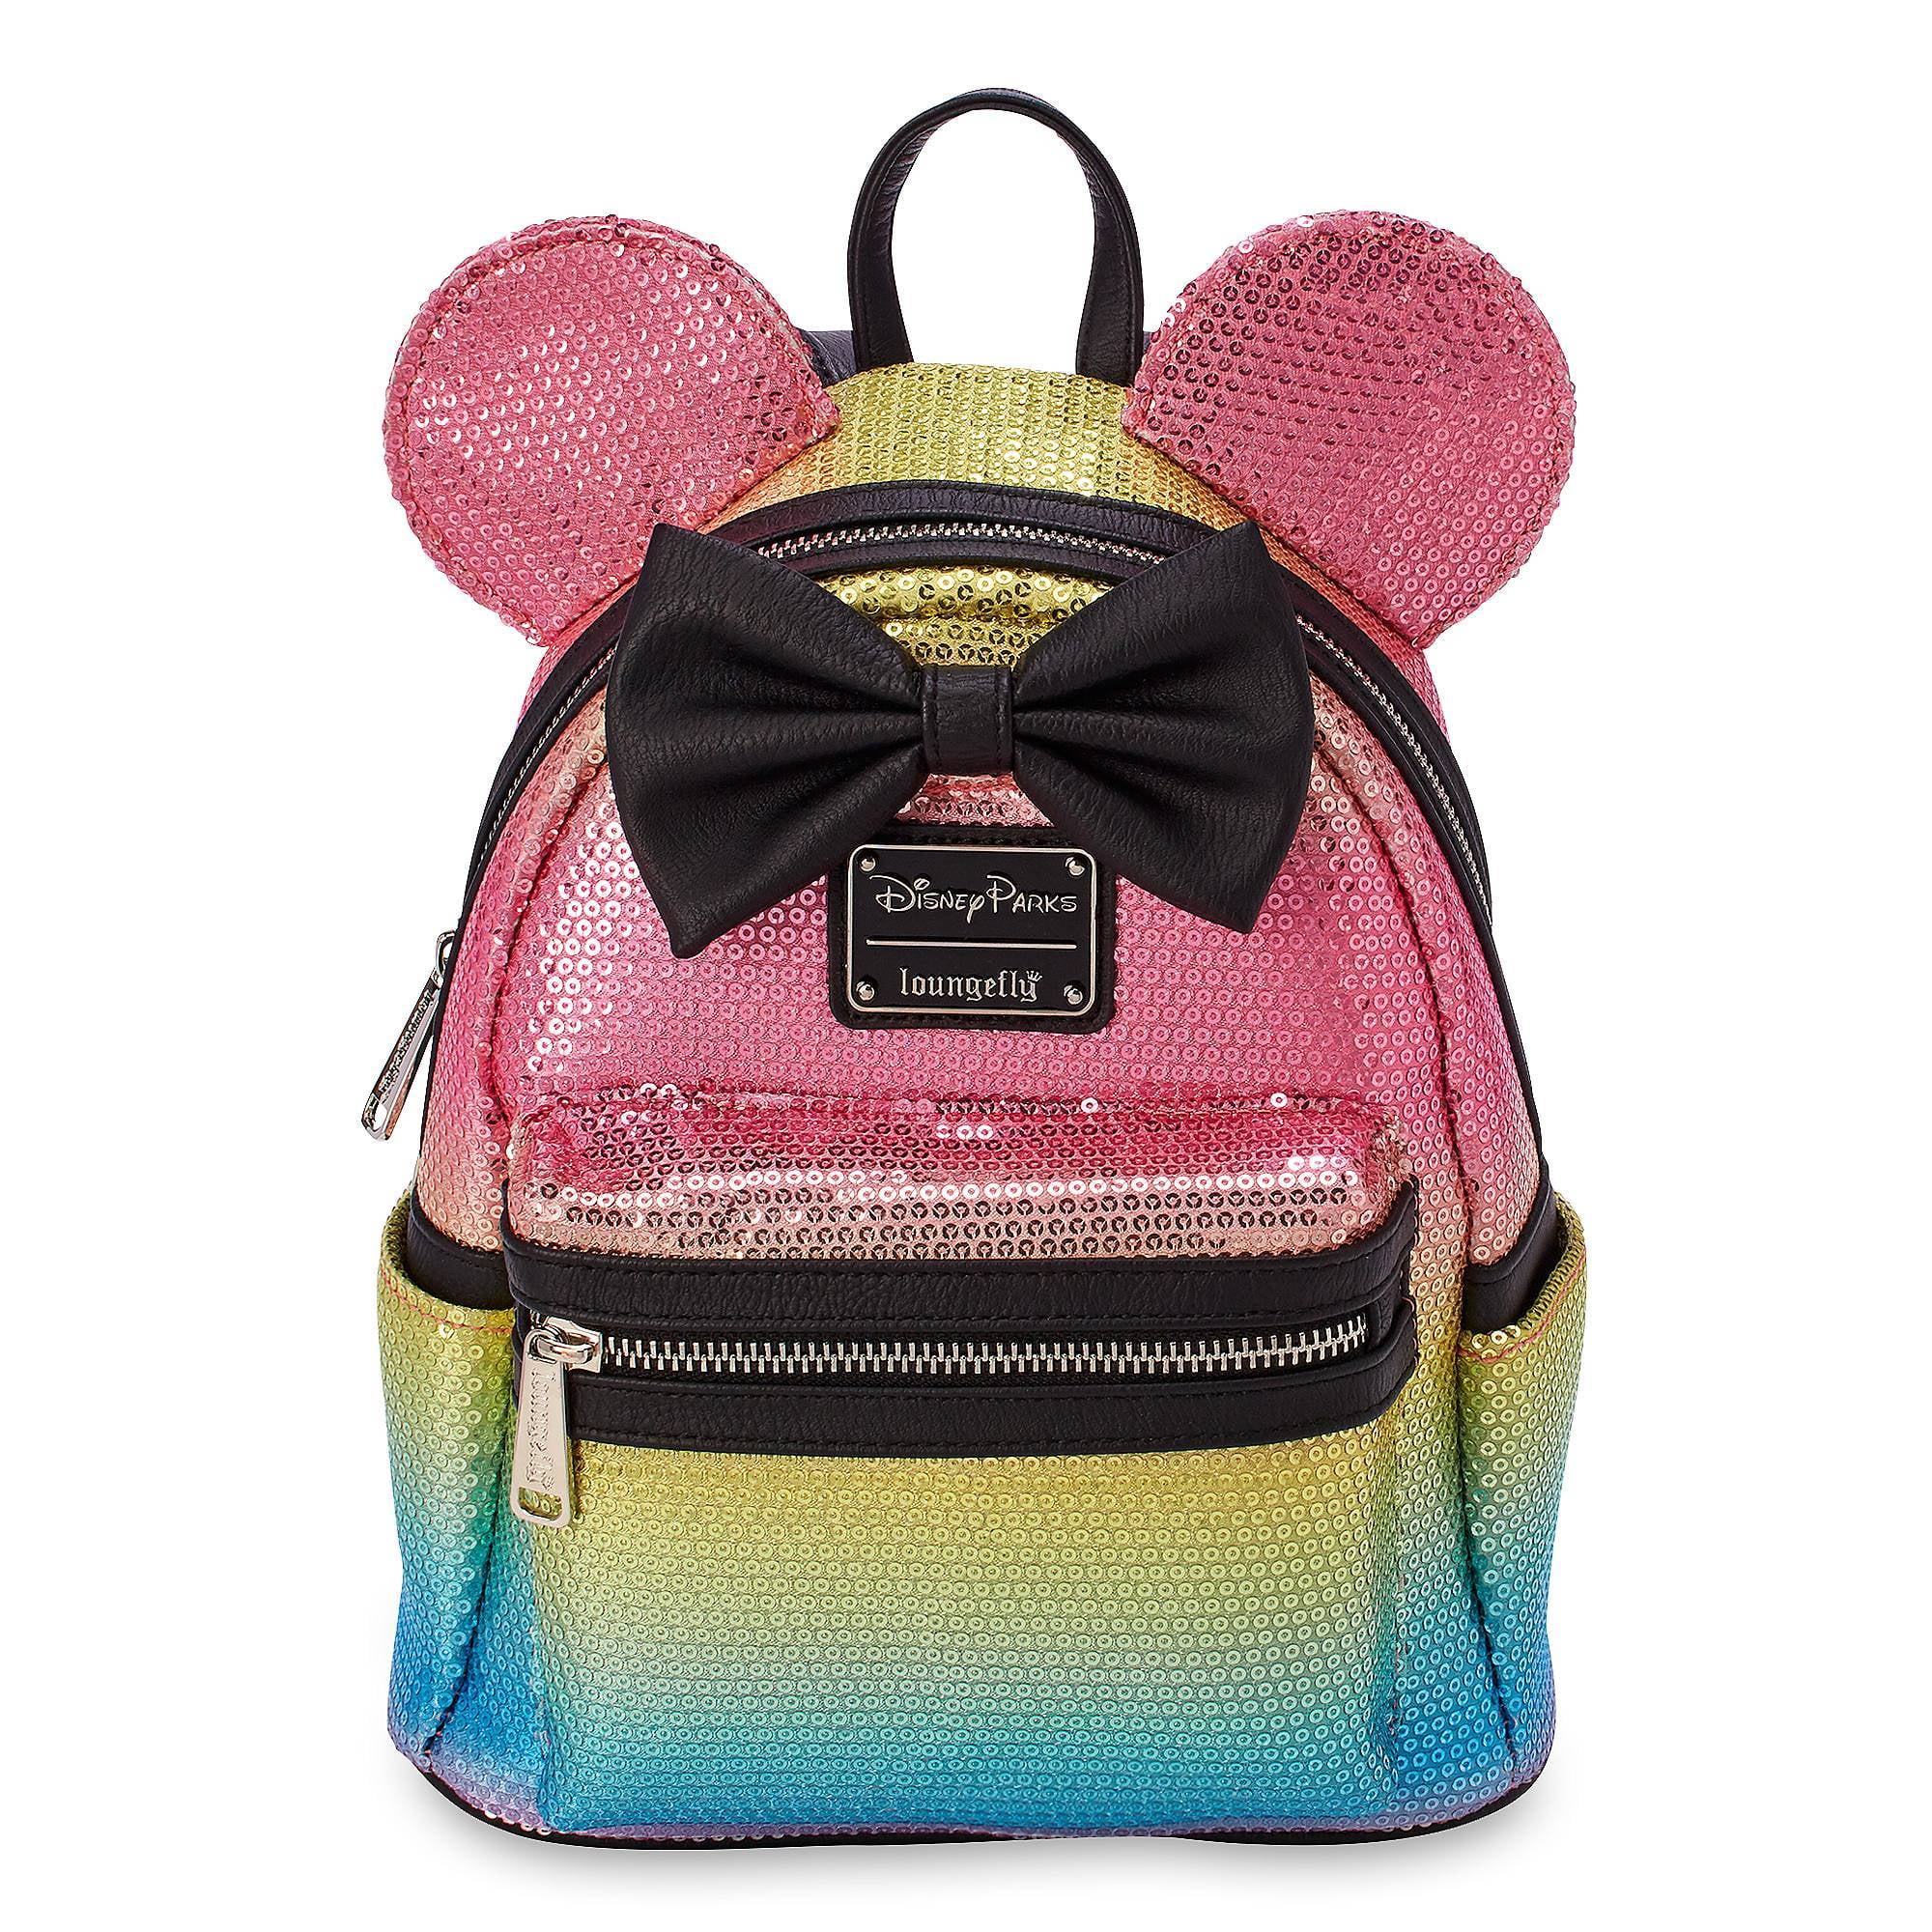 Loungefly Minnie Mouse Pastel Polka Dot Mini Backpack